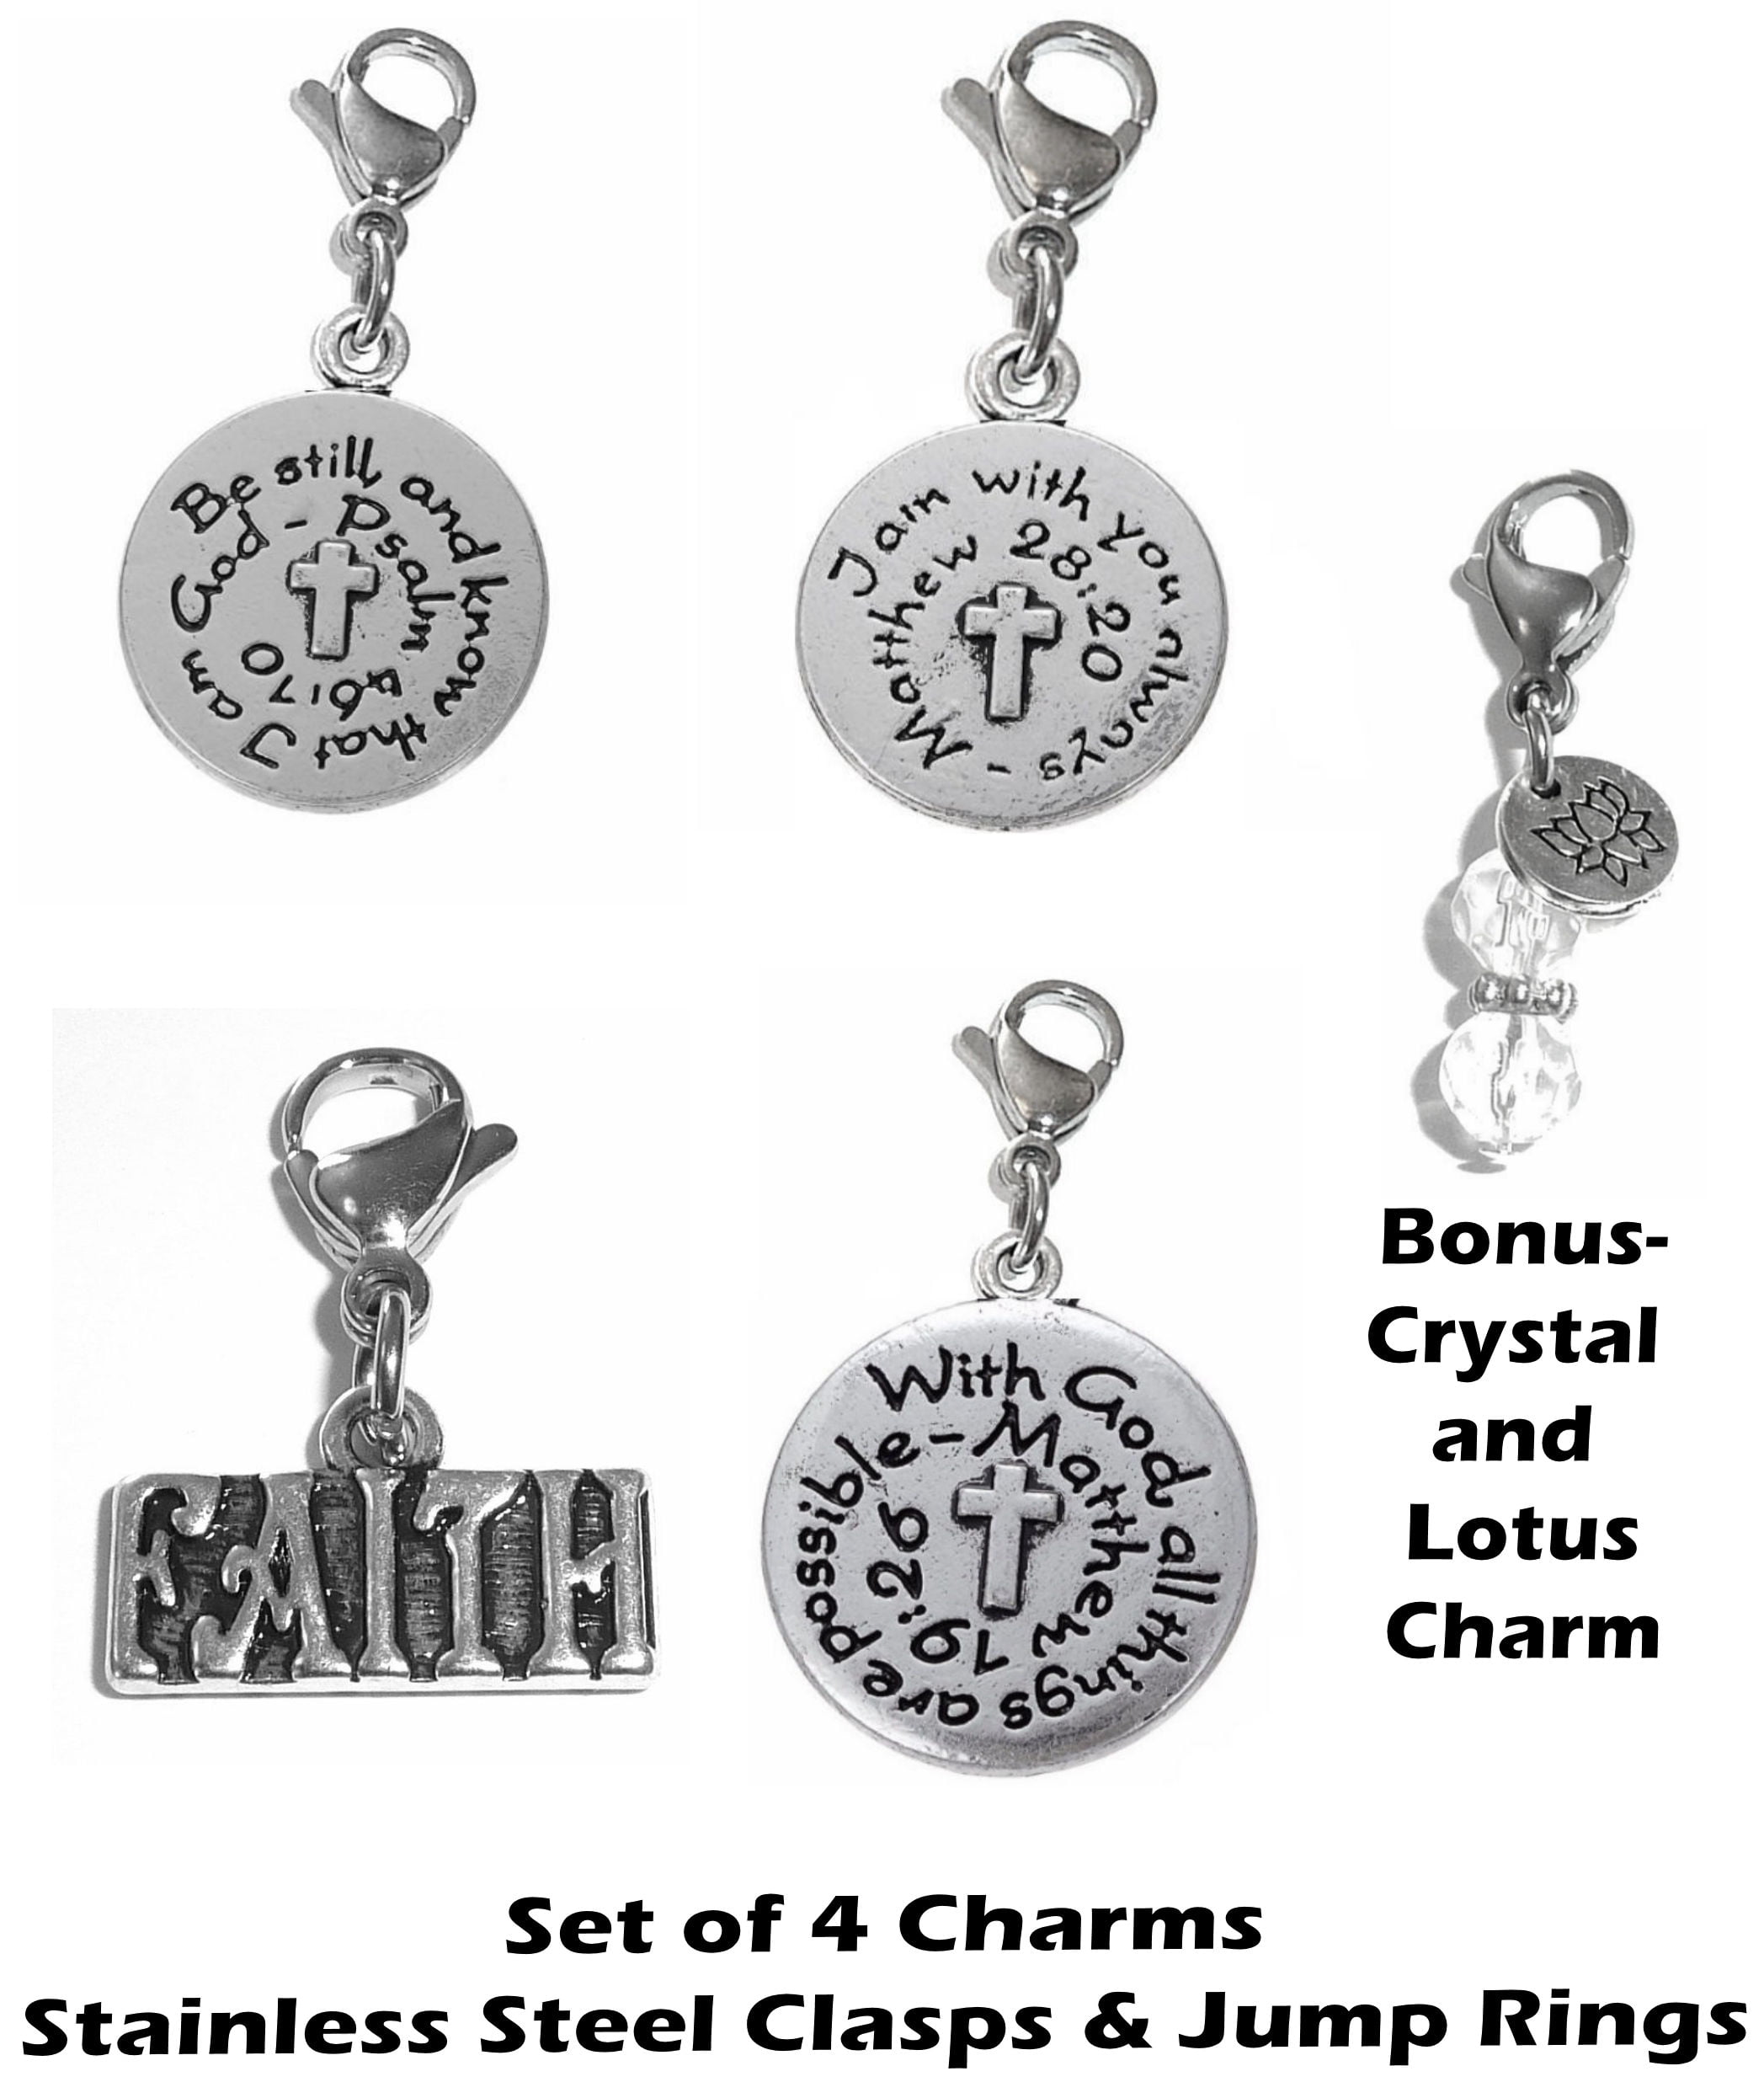 CHARM CHICAGO BULLS BASKETBALL TEAM CHARM 7/8 ACROSS x 7/8 IN LENGTH ADD TO ZIPPER PULL PURSE WALLET BACKPACK OR SMALL PET DOG CAT COLLAR LEASH ETC 